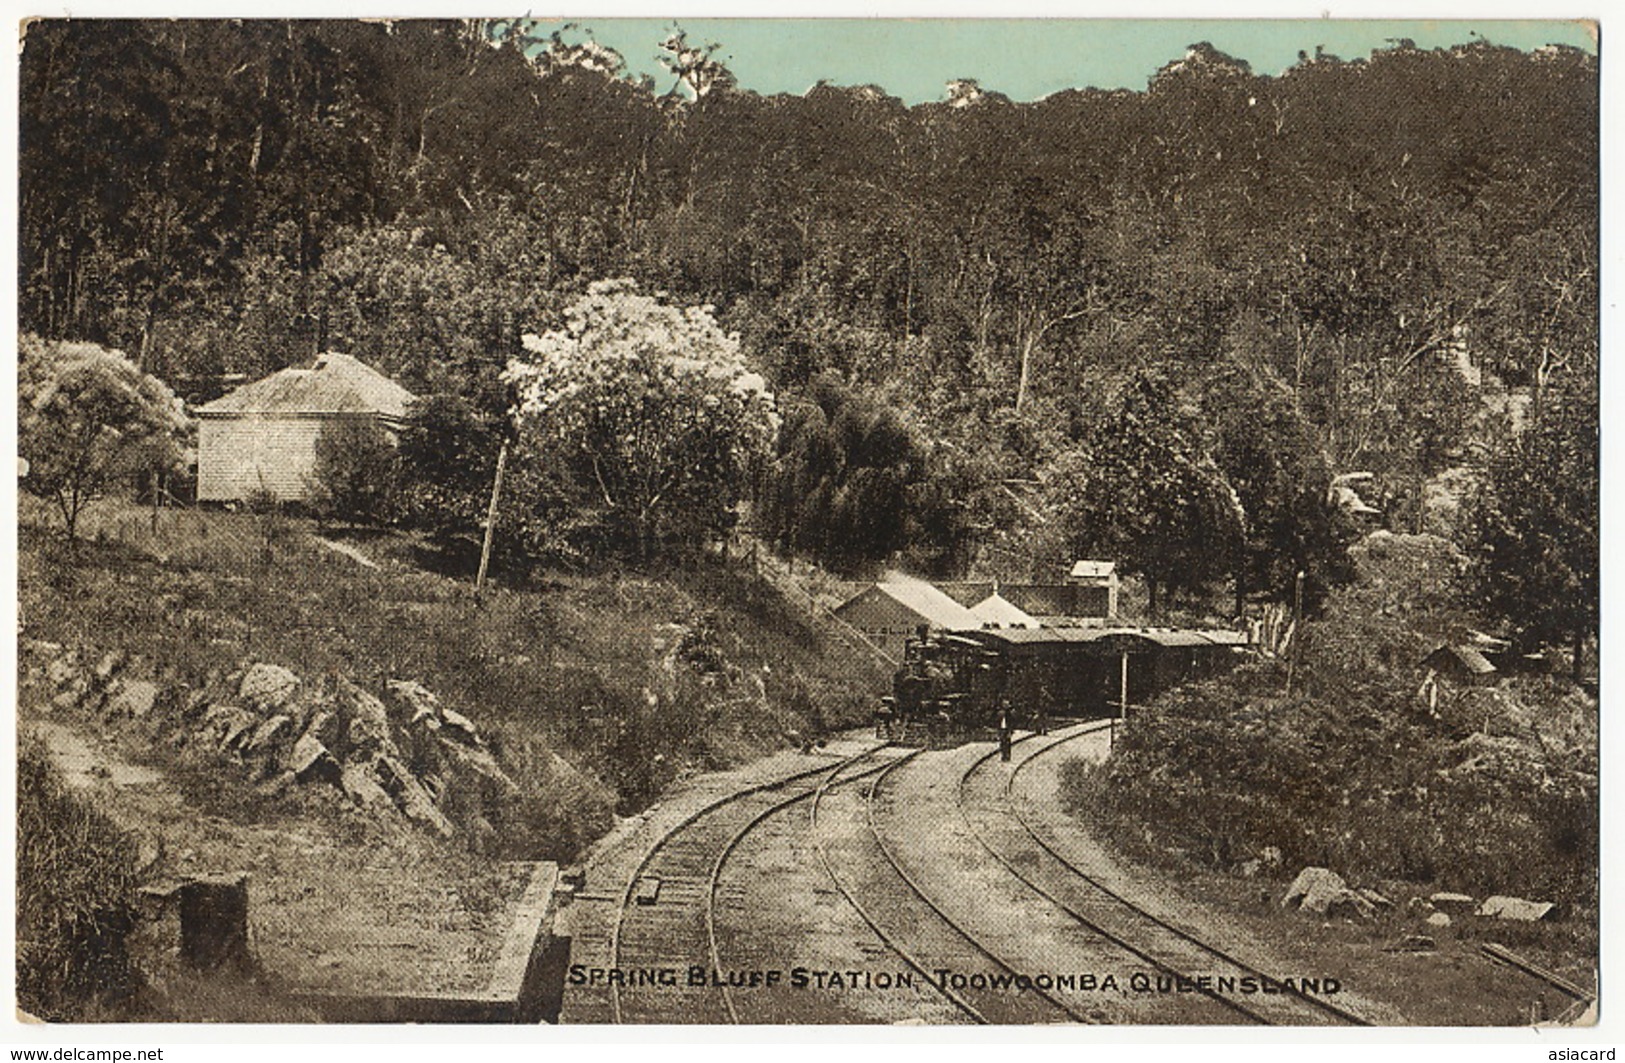 Spring Bluff Station Towoomba P. Used And Taxed 2 Cents To Windsted Connecticut Train - Towoomba / Darling Downs